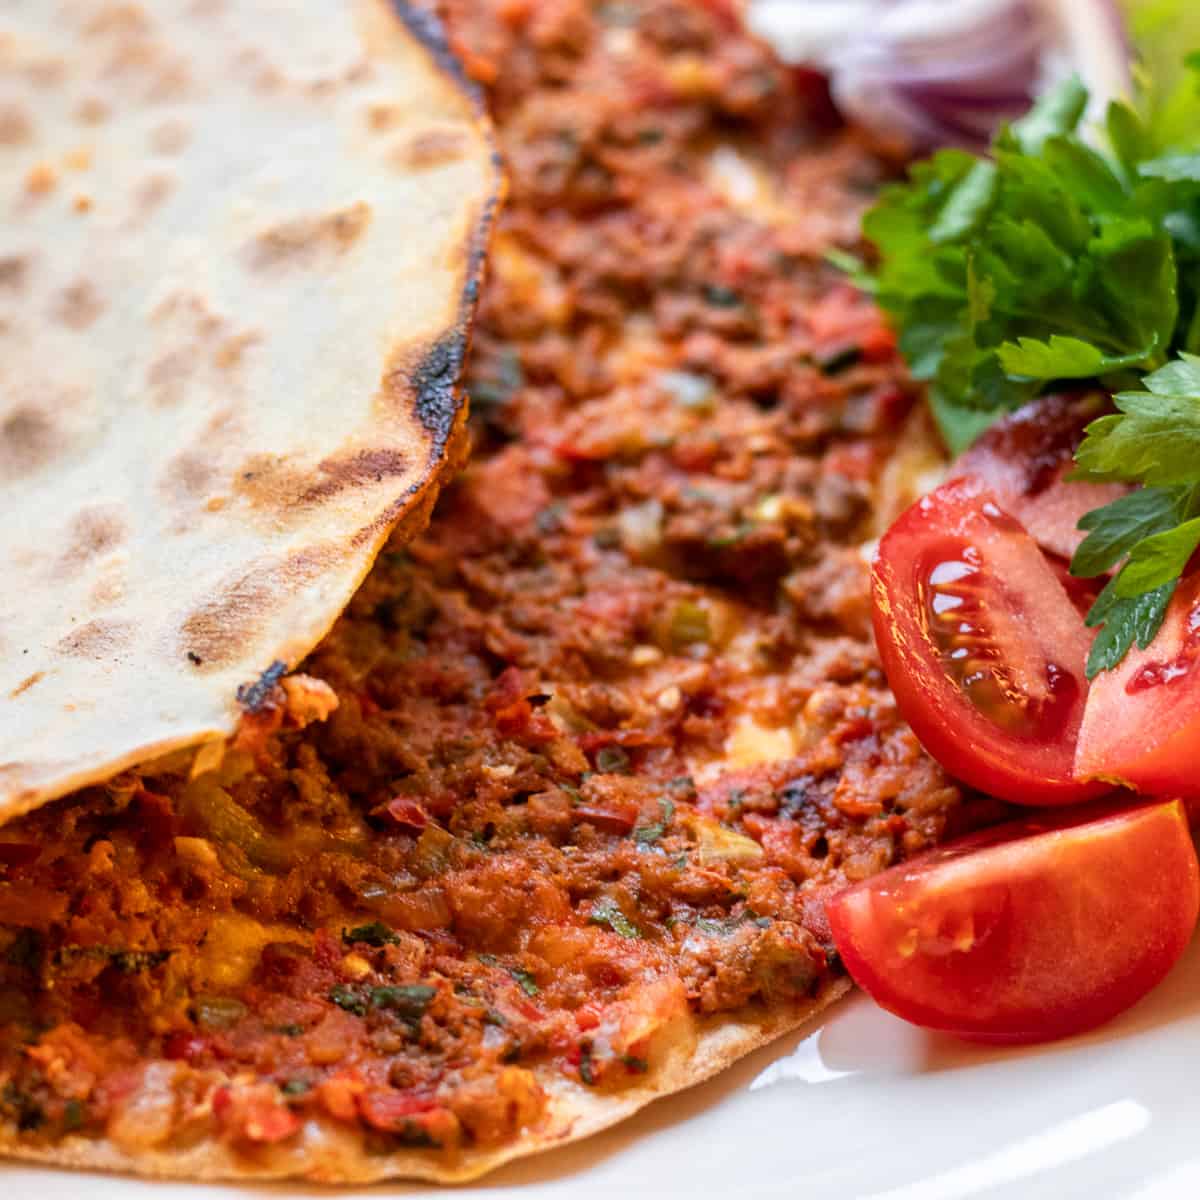 lahmacun served with fresh tomatoes and parsley